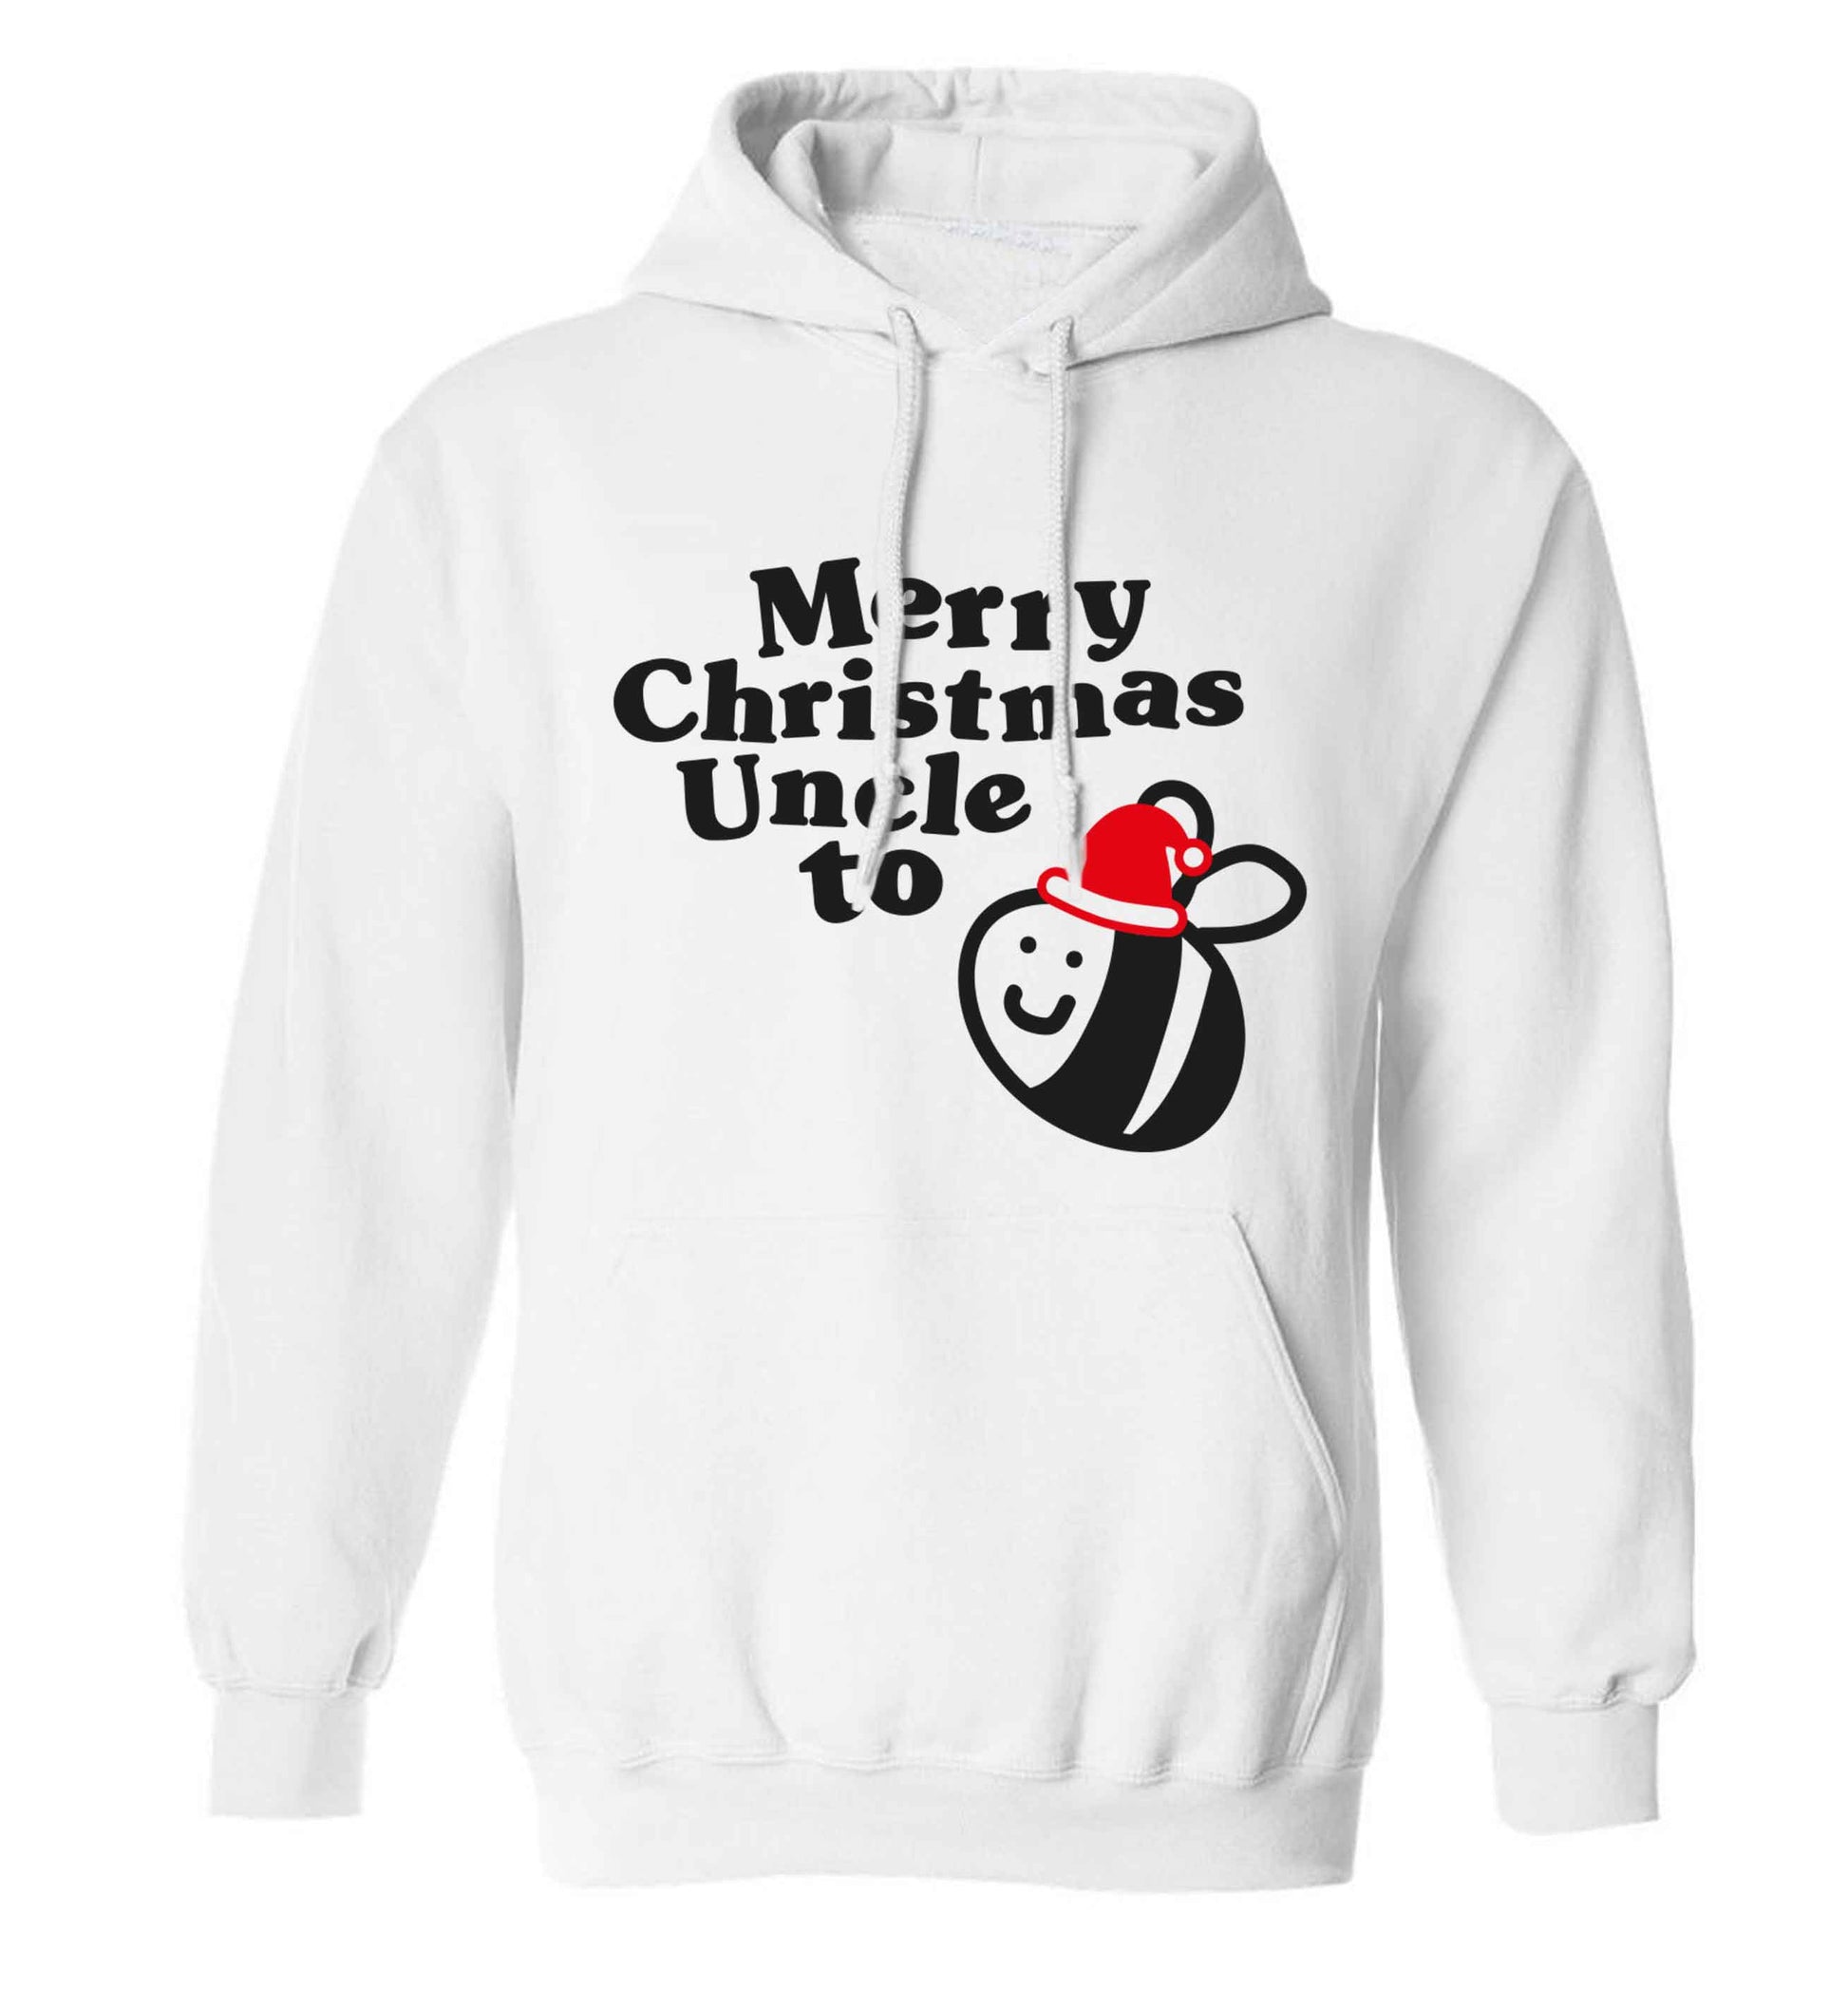 Merry Christmas uncle to be adults unisex white hoodie 2XL